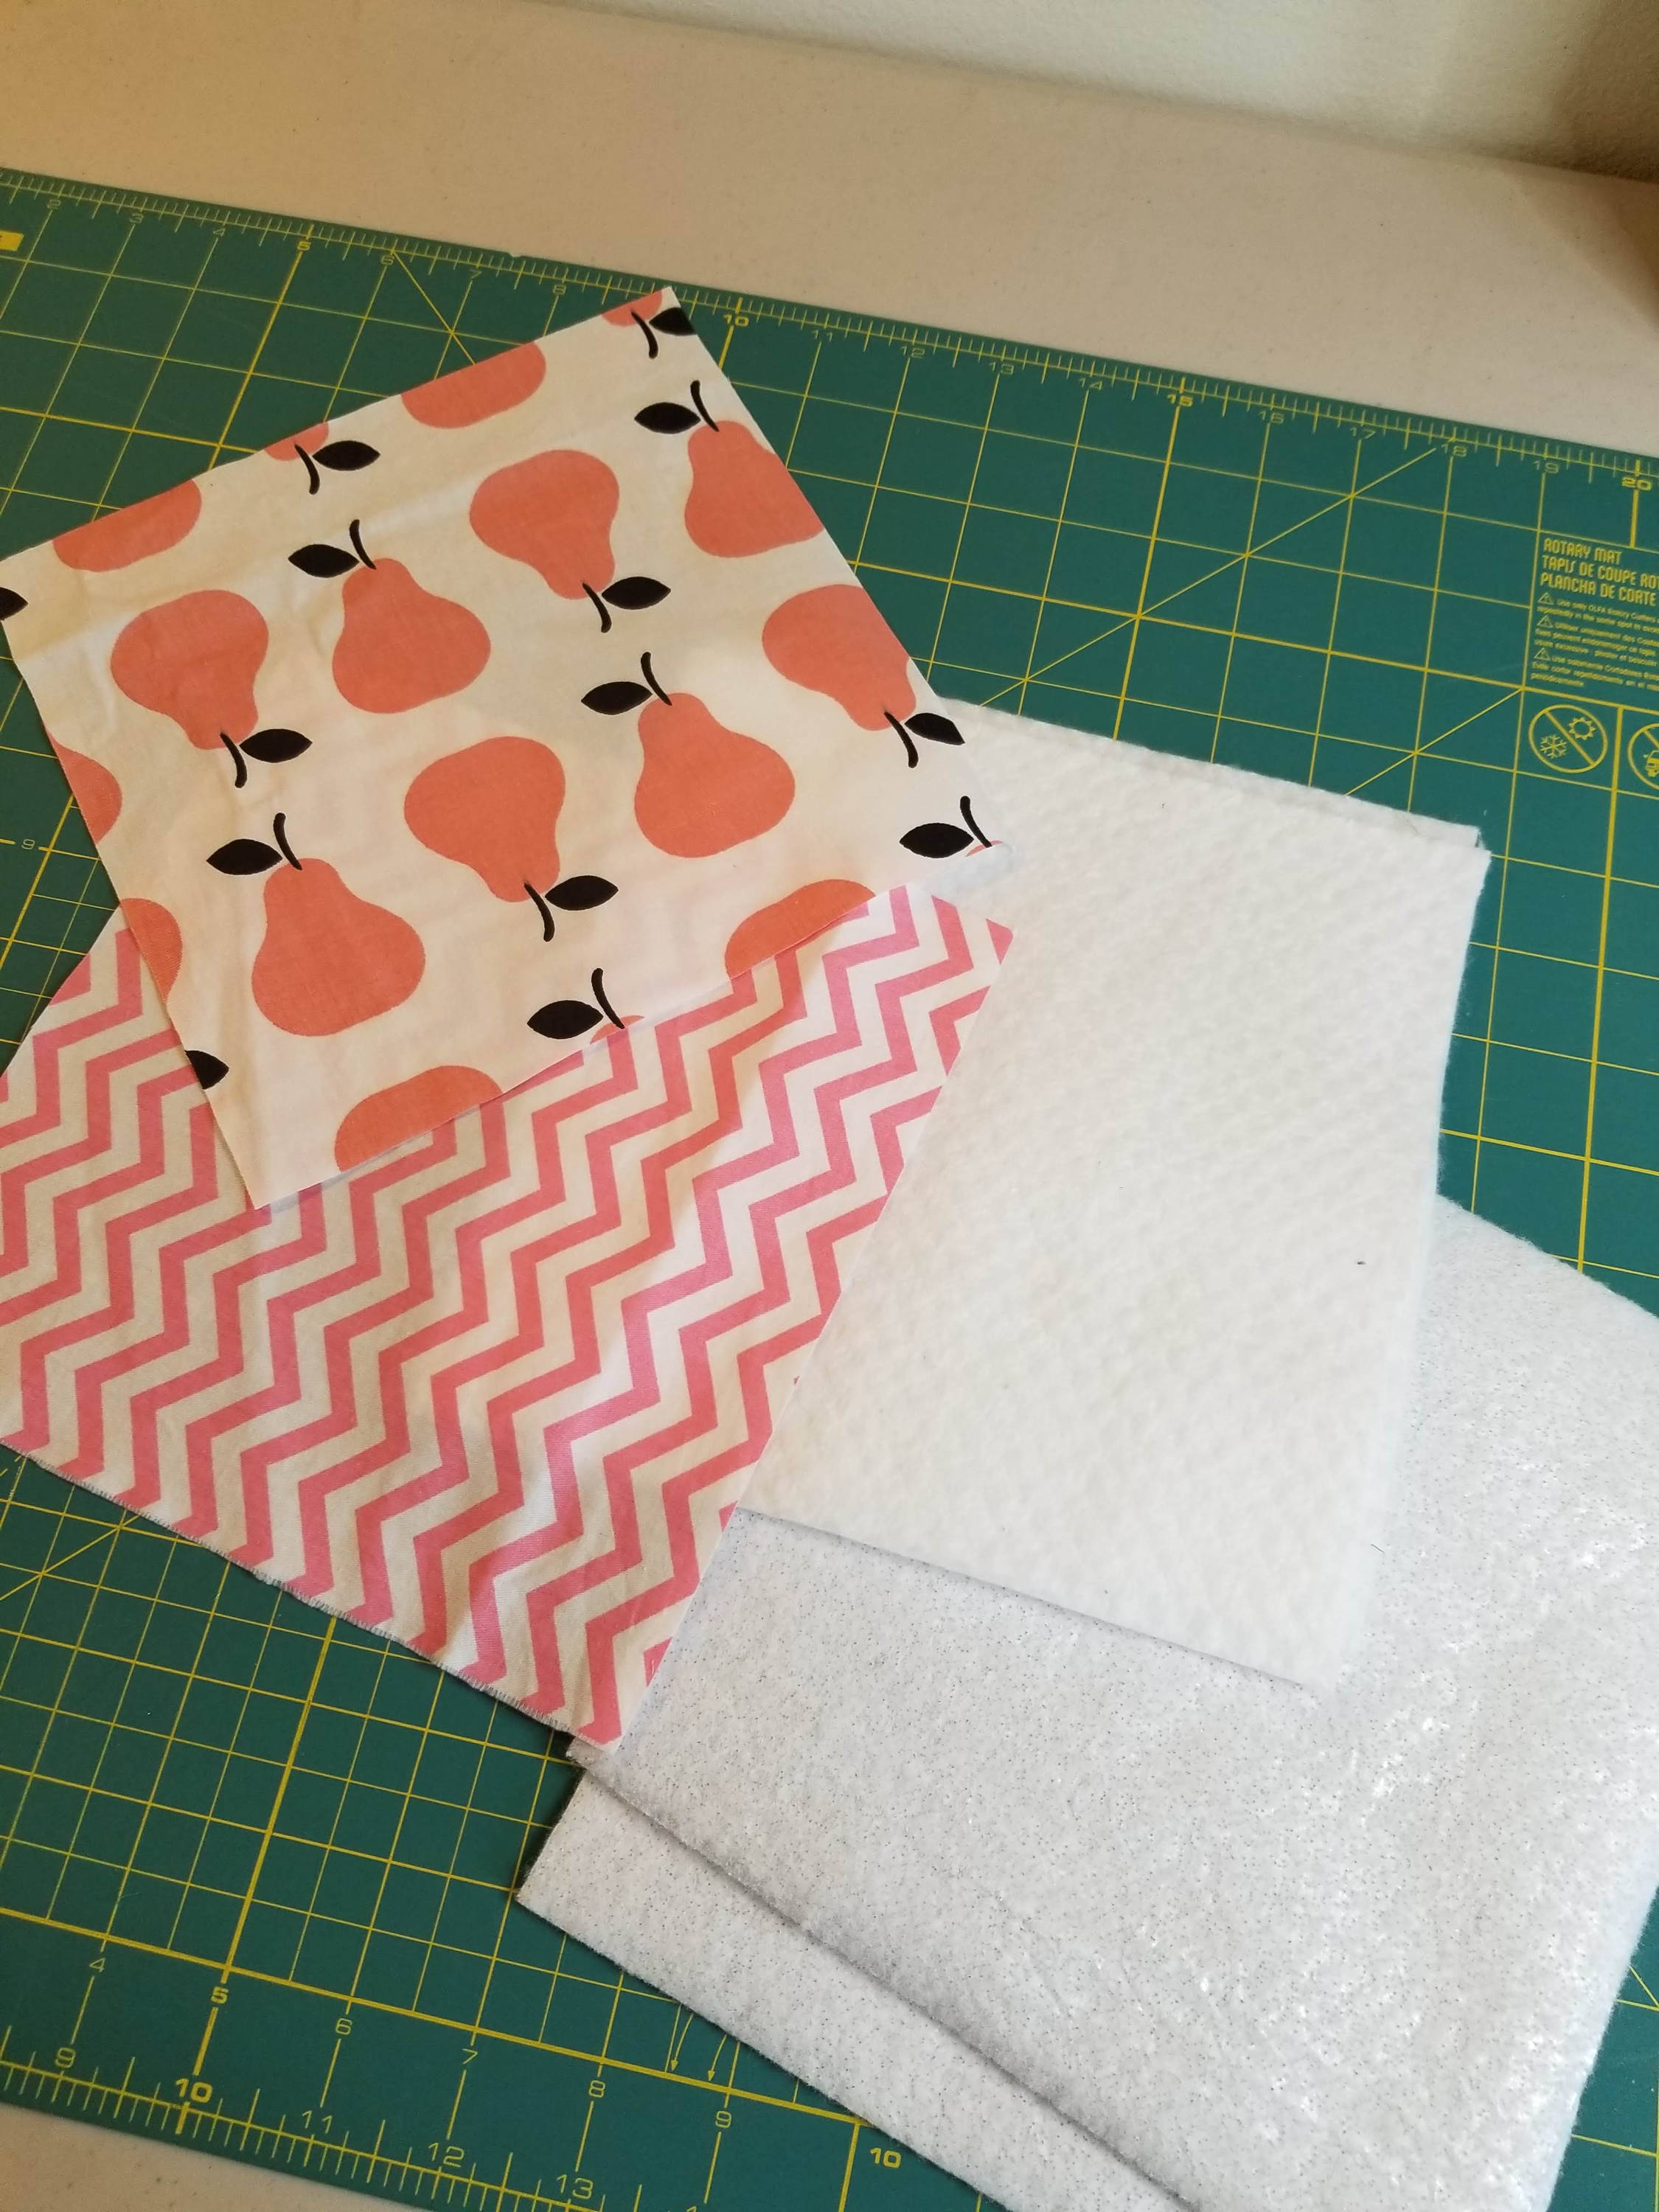 How To Make Kitchen Hot Pads